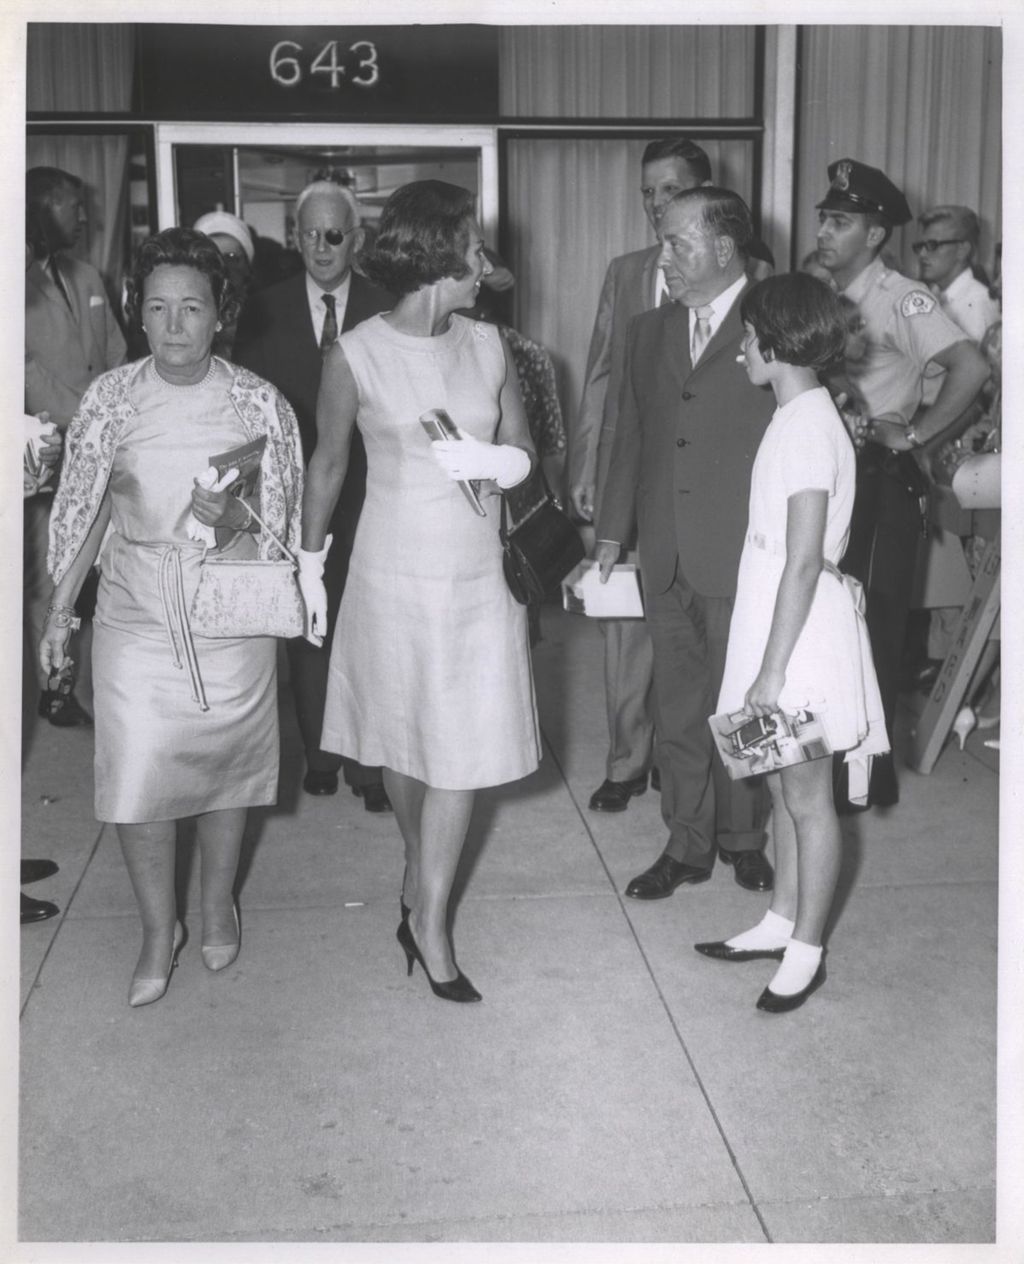 Miniature of Eleanor Daley and Ethel Kennedy exiting the John F. Kennedy memorial exhibition